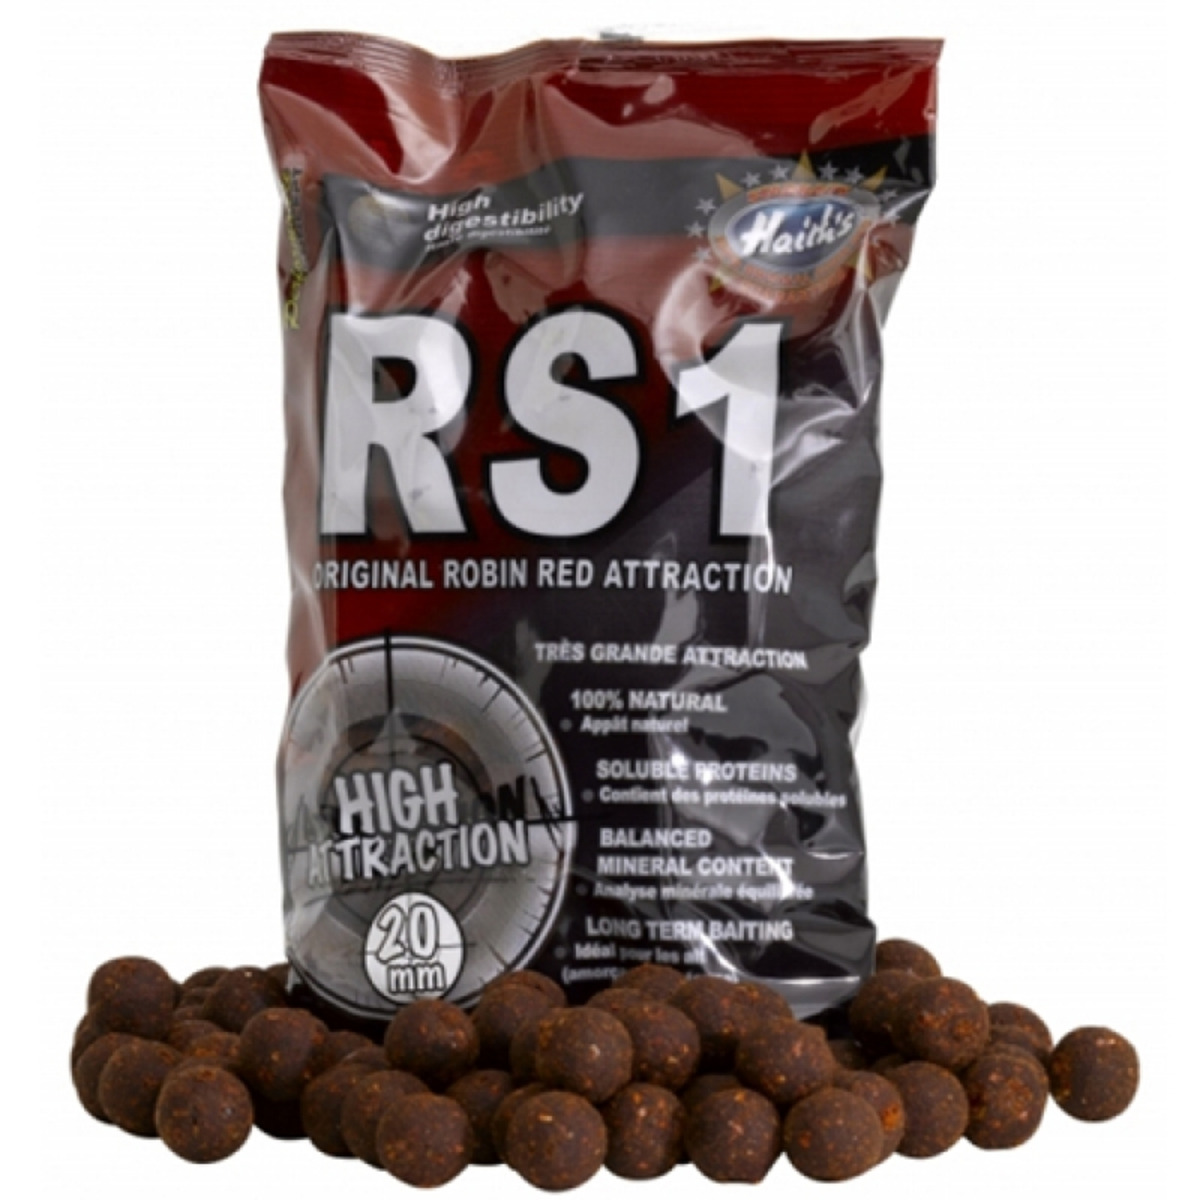 Starbaits Concept Boilies Rs1 - 20 mm  - 1 kg